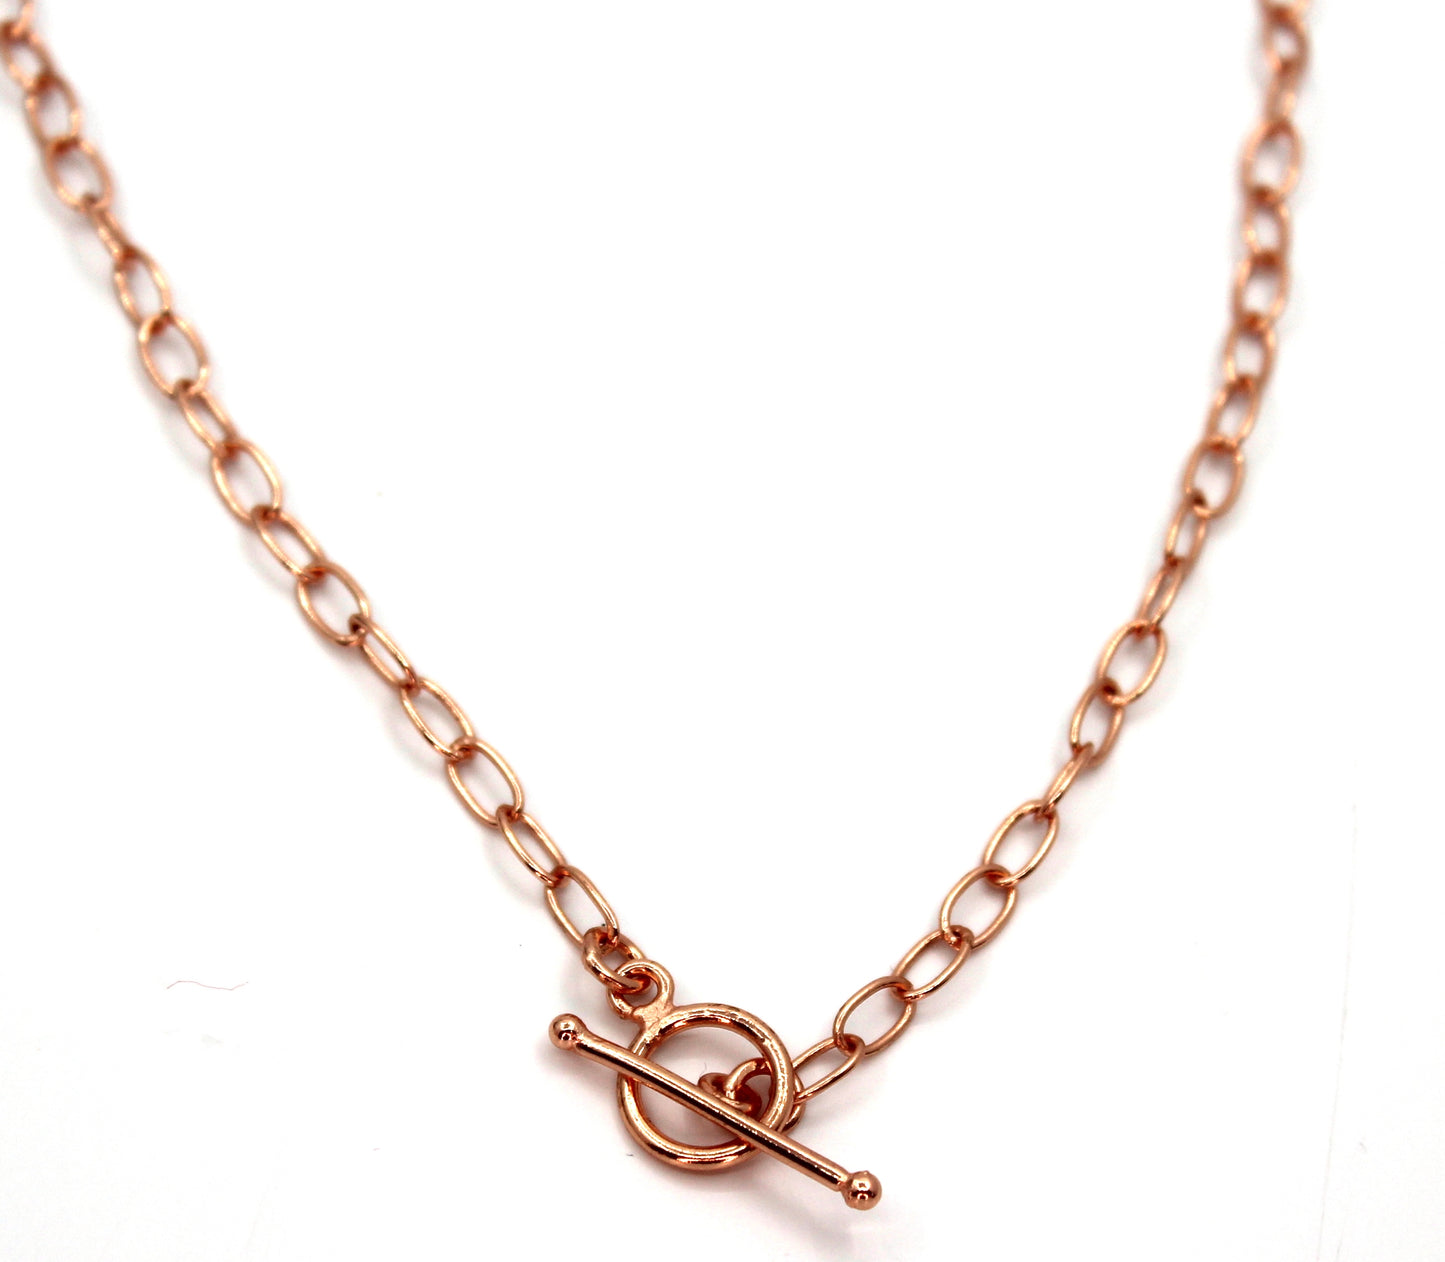 Create Your Own Oval Link Charm Necklace